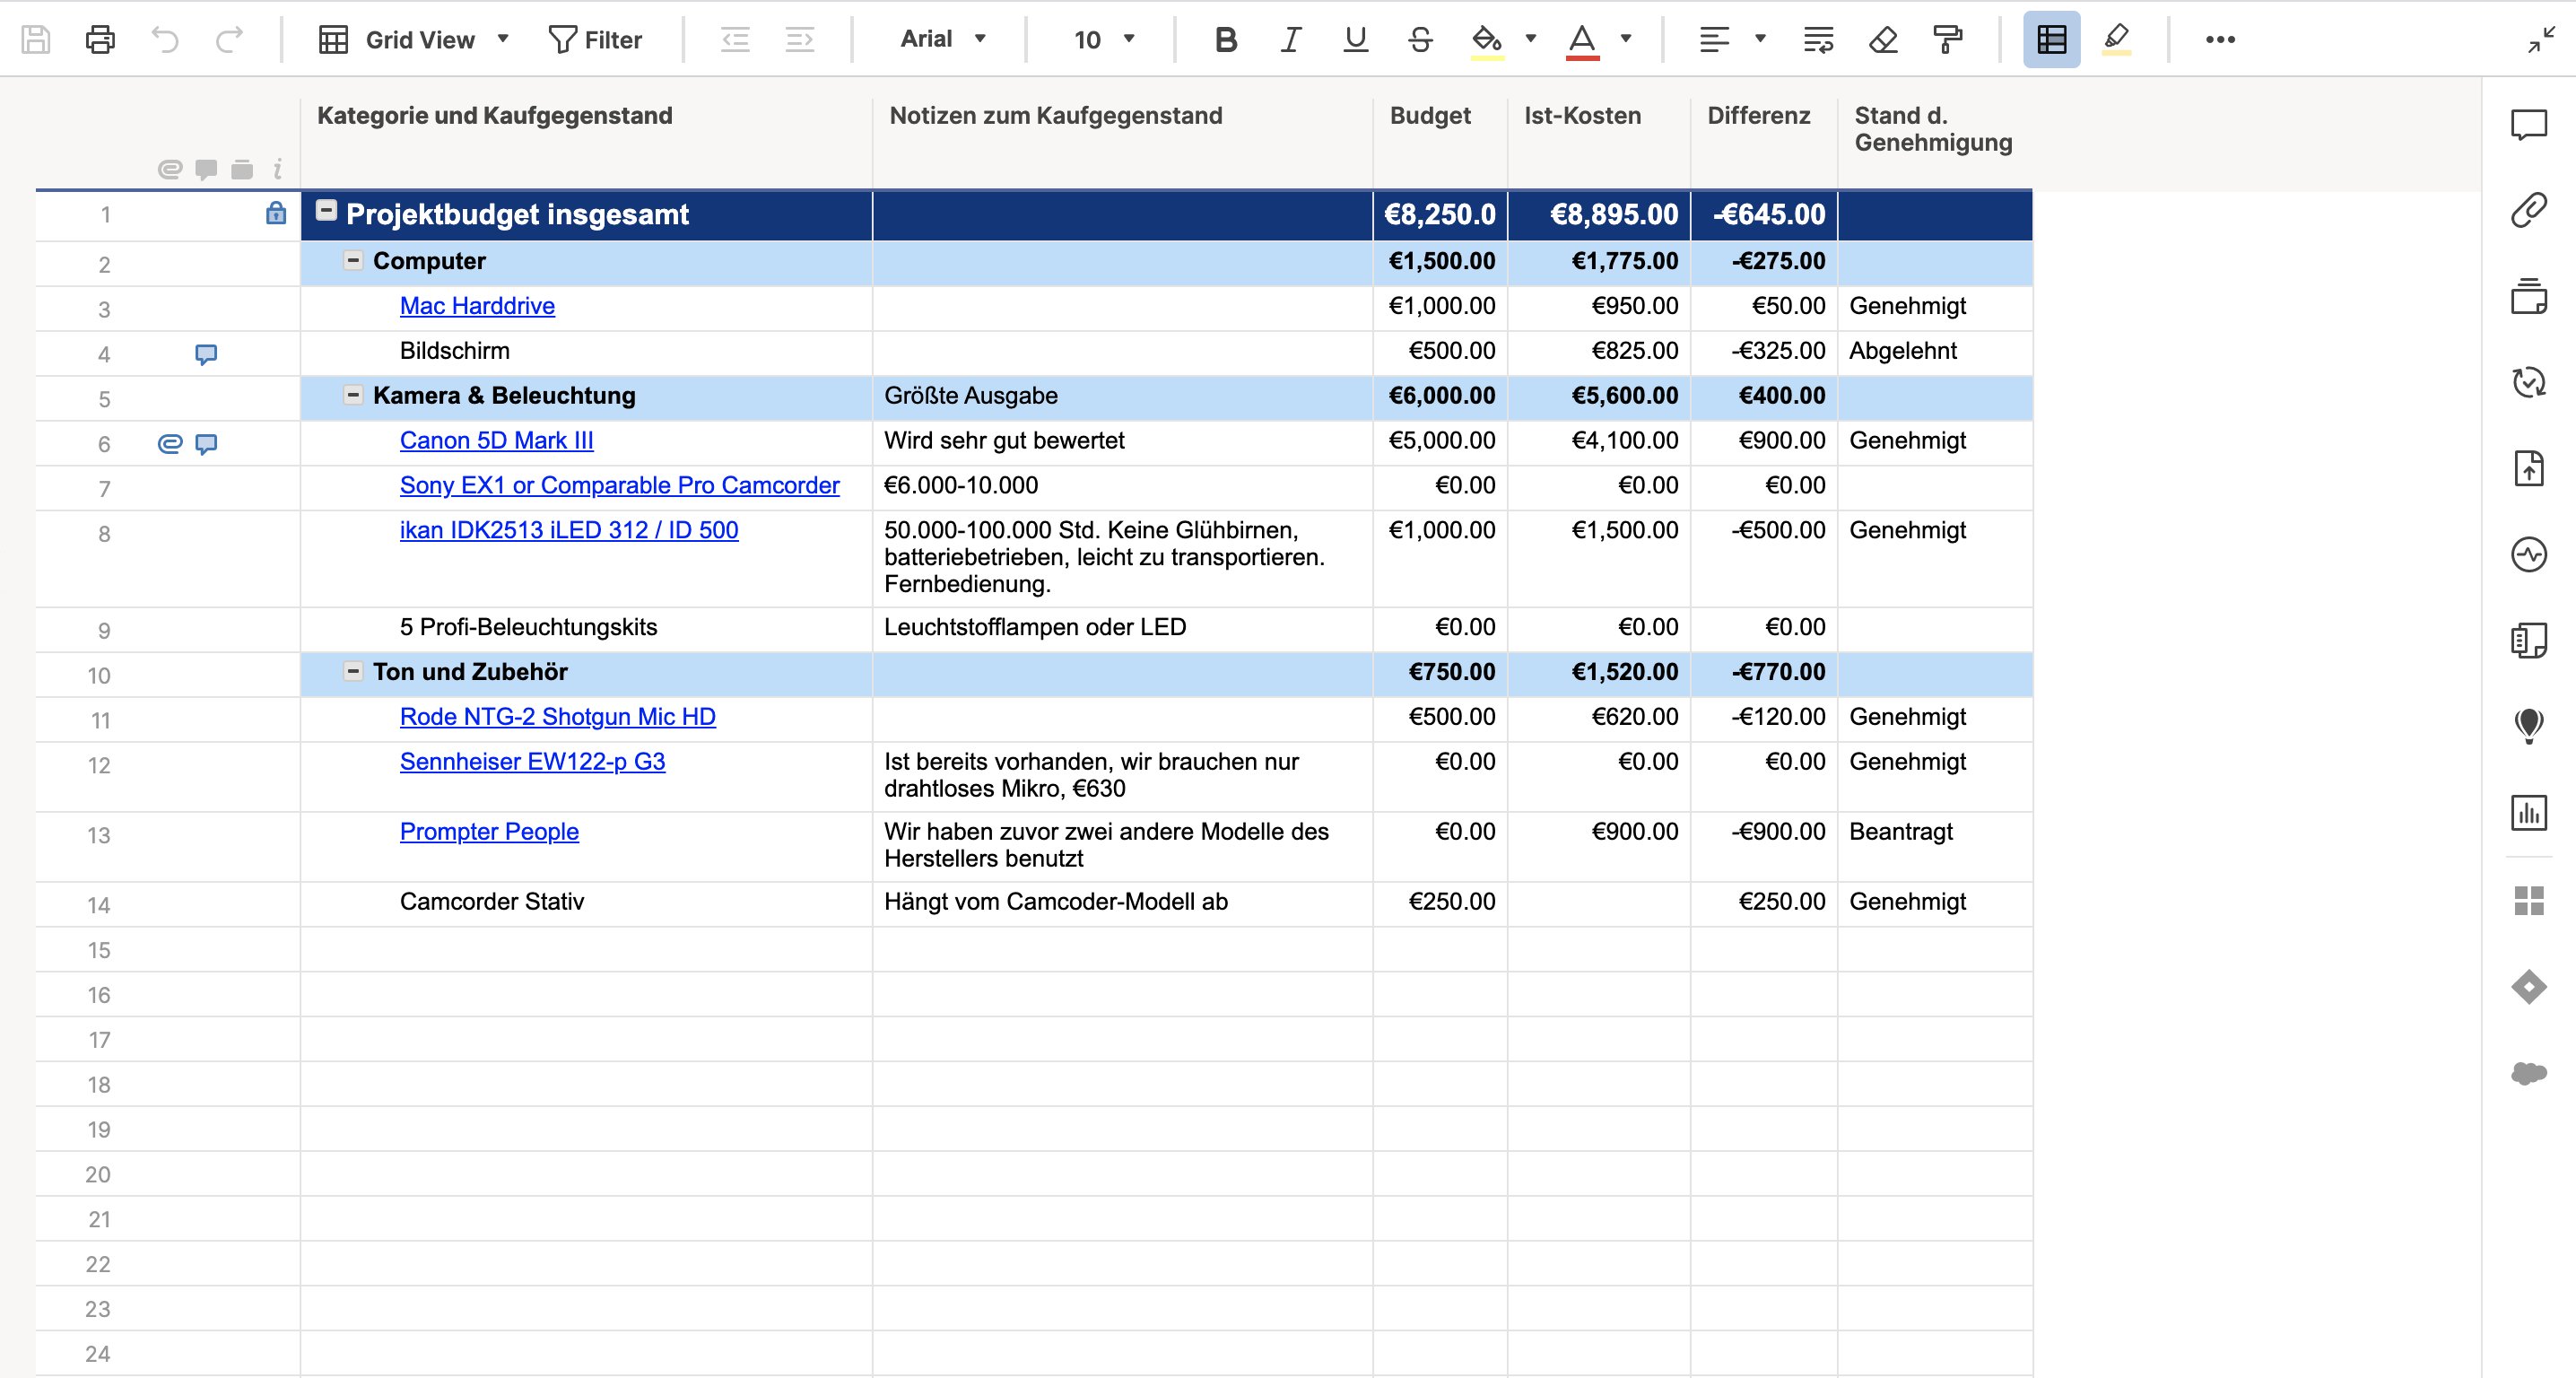 project budget template